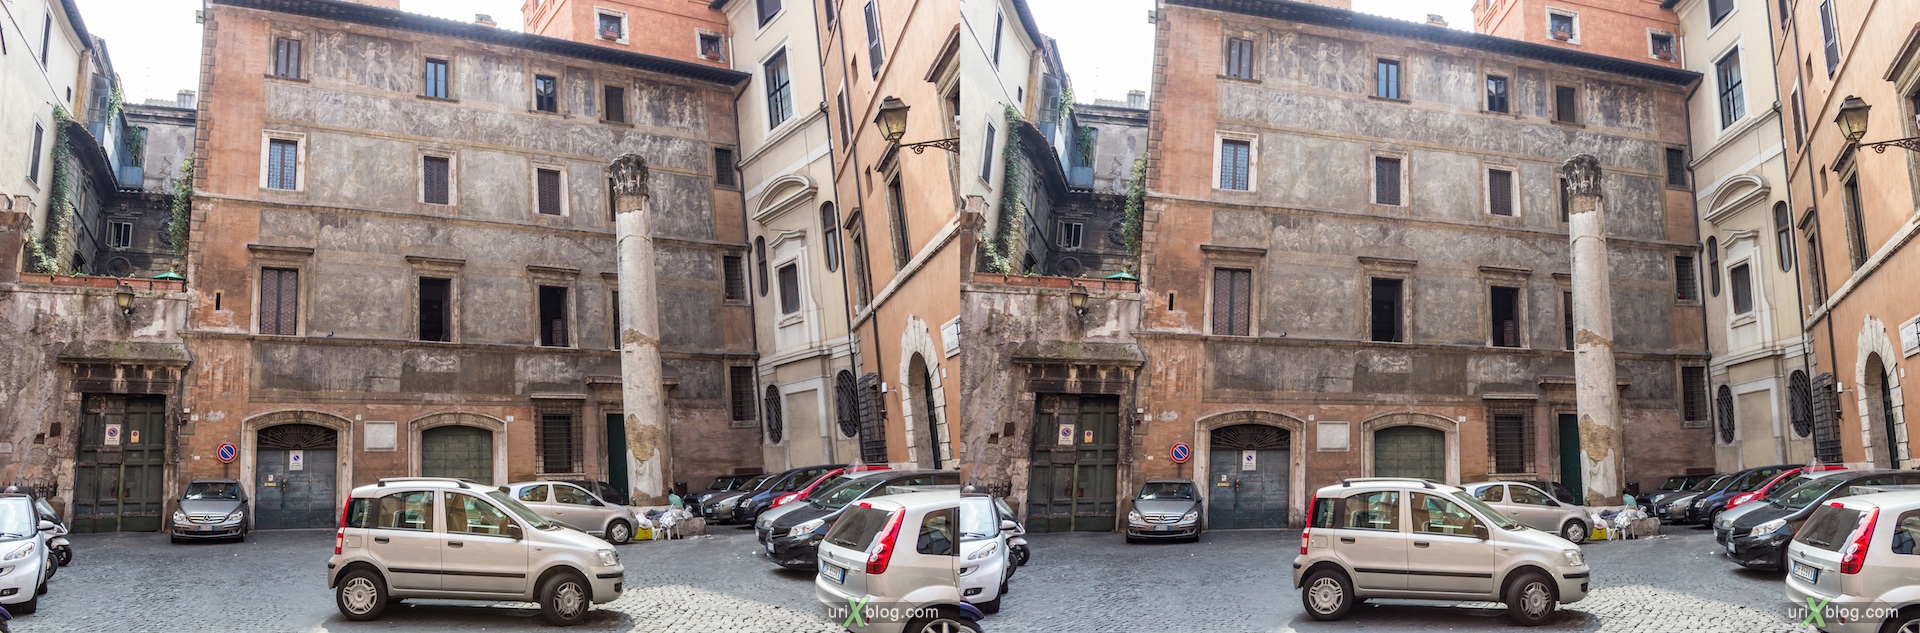 2012, piazza dei Massimi, palazzo Massimi, Rome, Italy, 3D, stereo pair, cross-eyed, crossview, cross view stereo pair